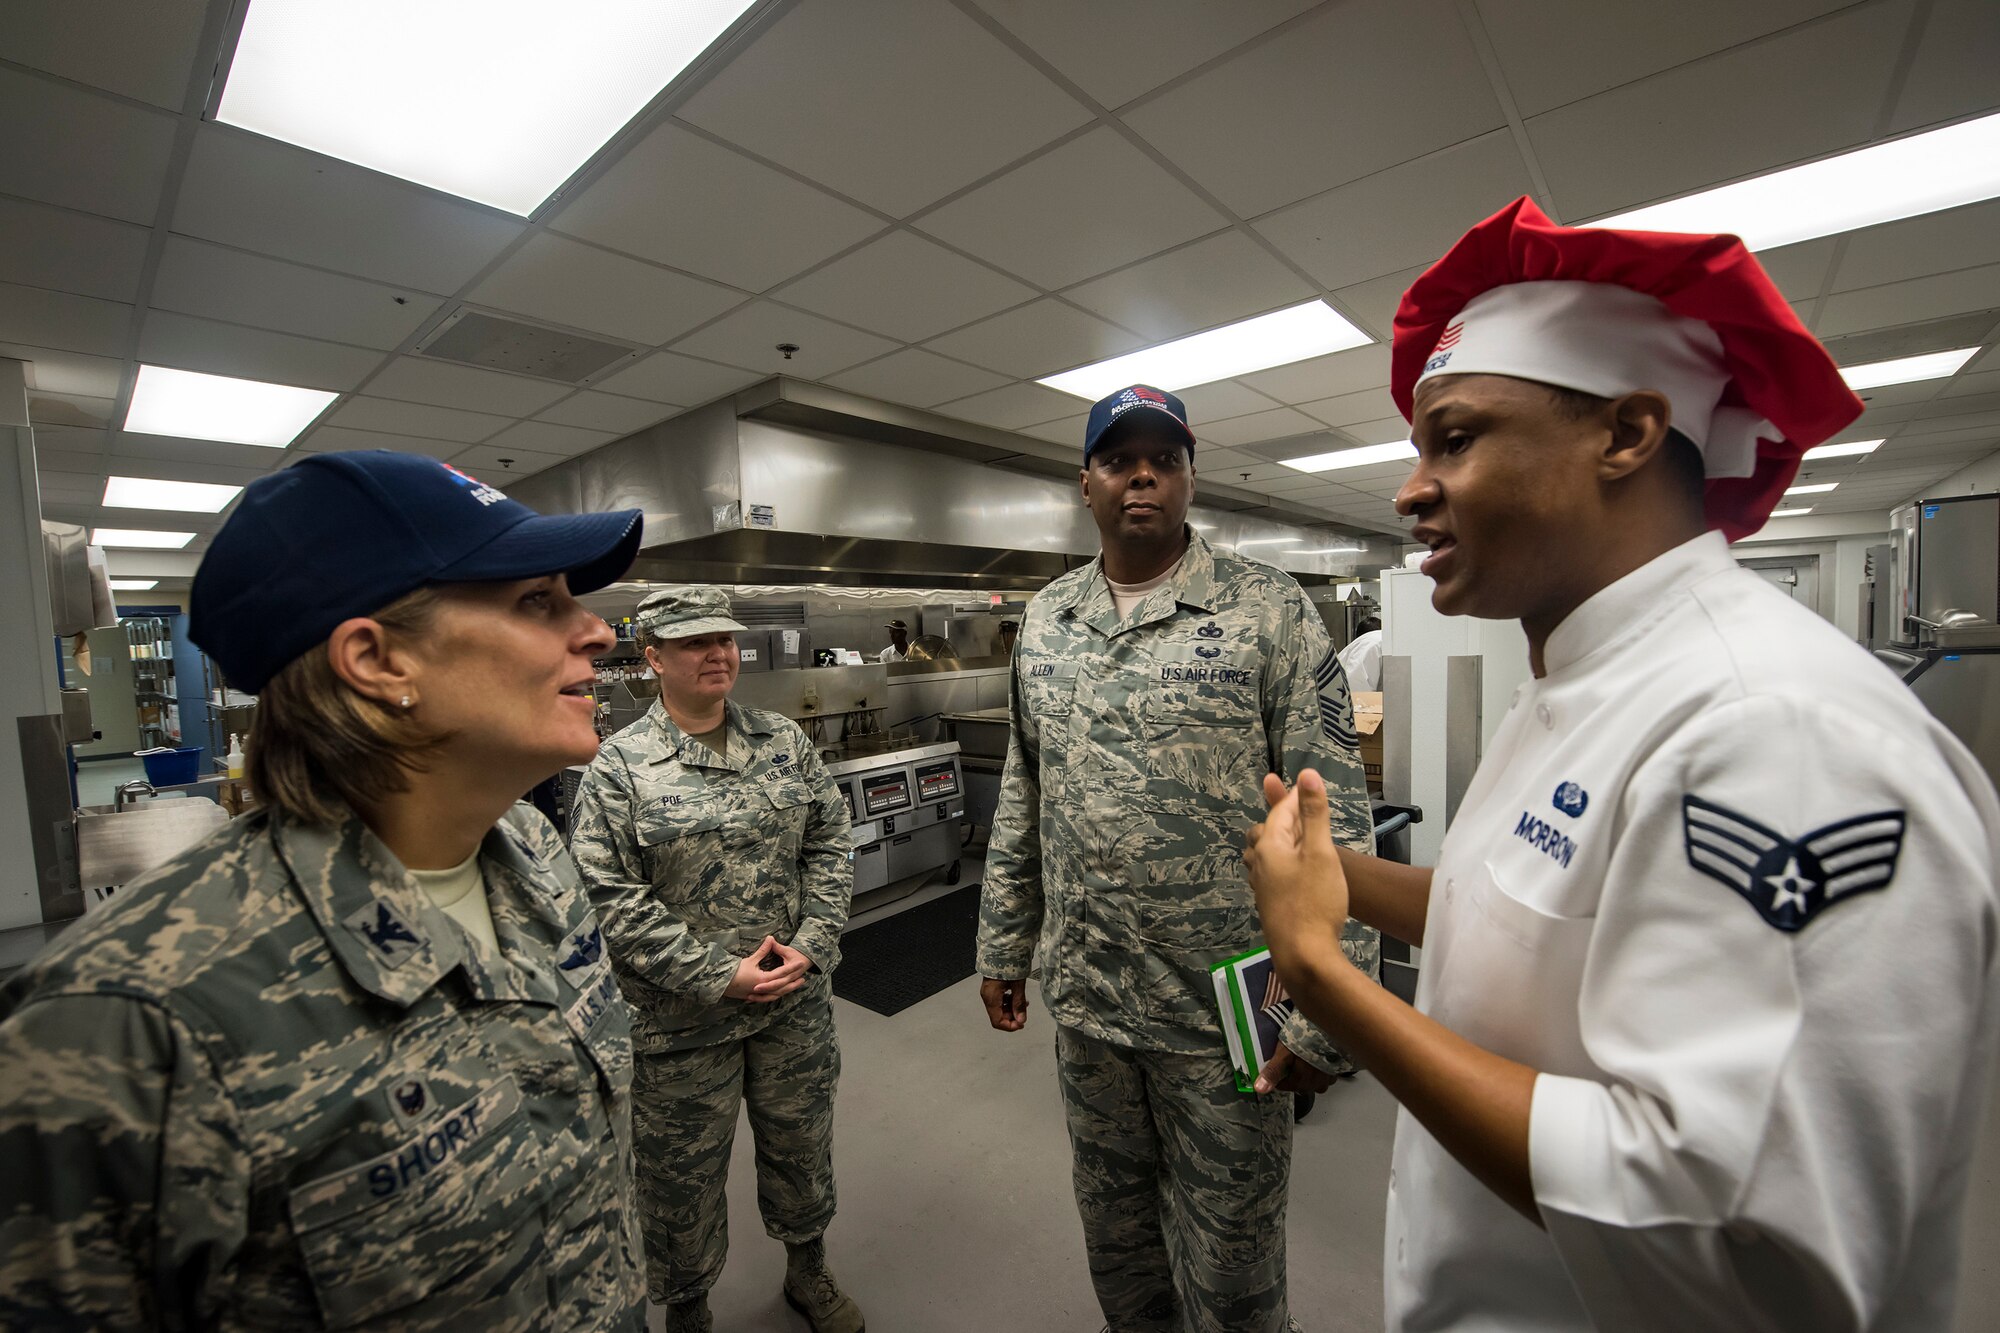 Senior Airman Cameron Morrow, right, 23d Force Support Squadron food service shift leader, briefs Col. Jennifer Short, 23d Wing (WG) commander, during an immersion tour, June 11, 2018, at Moody Air Force Base, Ga. Short and Chief Master Sgt James Allen, 23d WG command chief, toured the Georgia Pines Dining Facility and the Information Learning Center to gain a better understanding of their overall mission, capabilities, and comprehensive duties. (U.S. Air Force photo by Airman 1st Class Eugene Oliver)